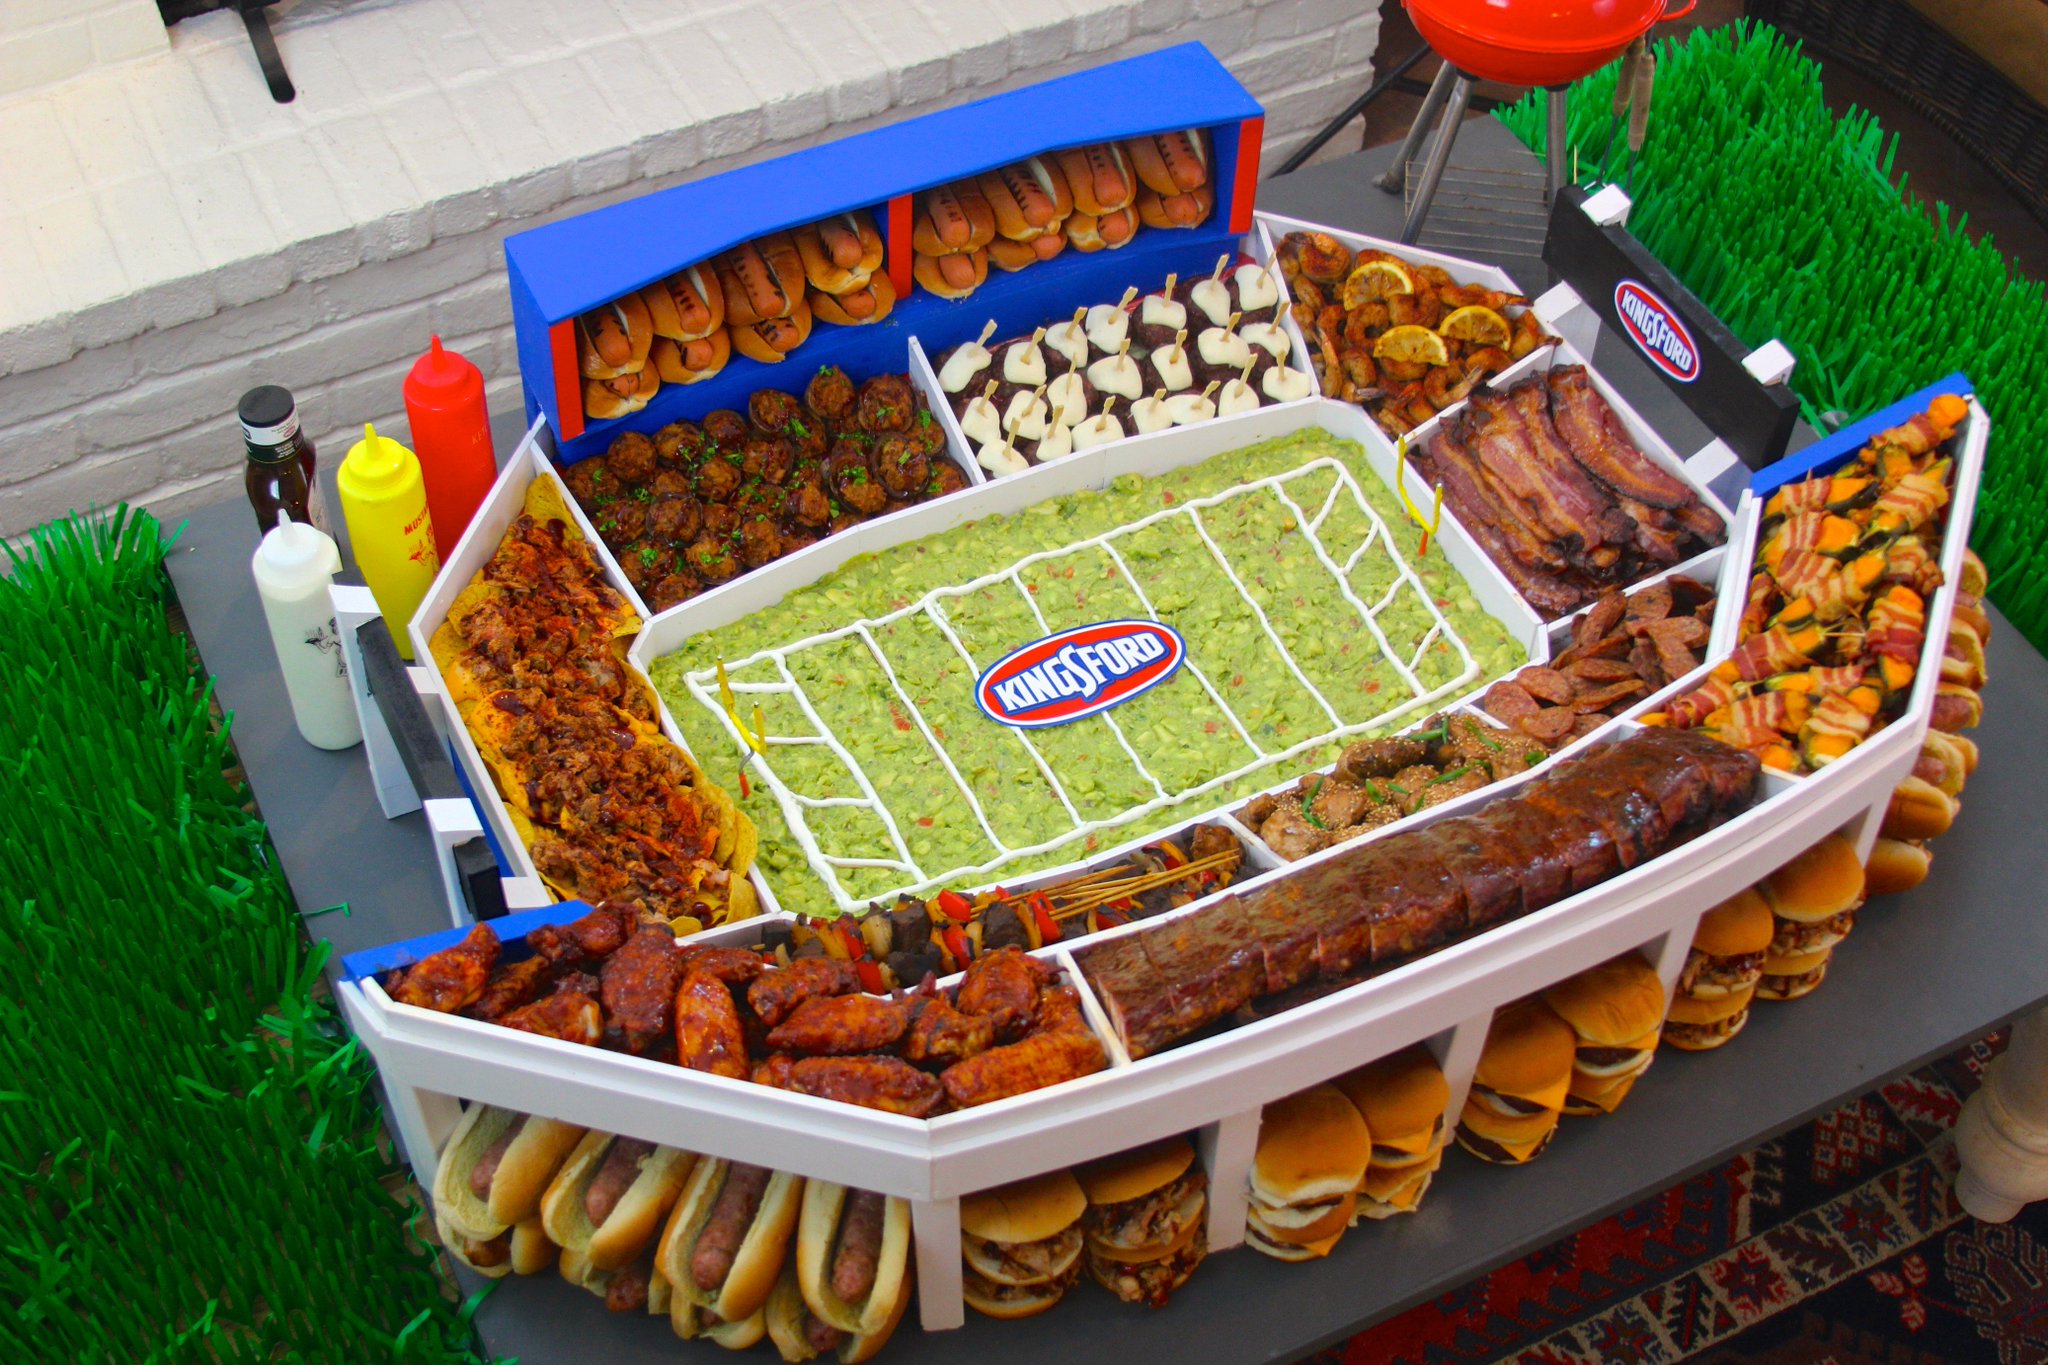 Kingsford Charcoal on Twitter: "Our BBQ Snack Stadium ...